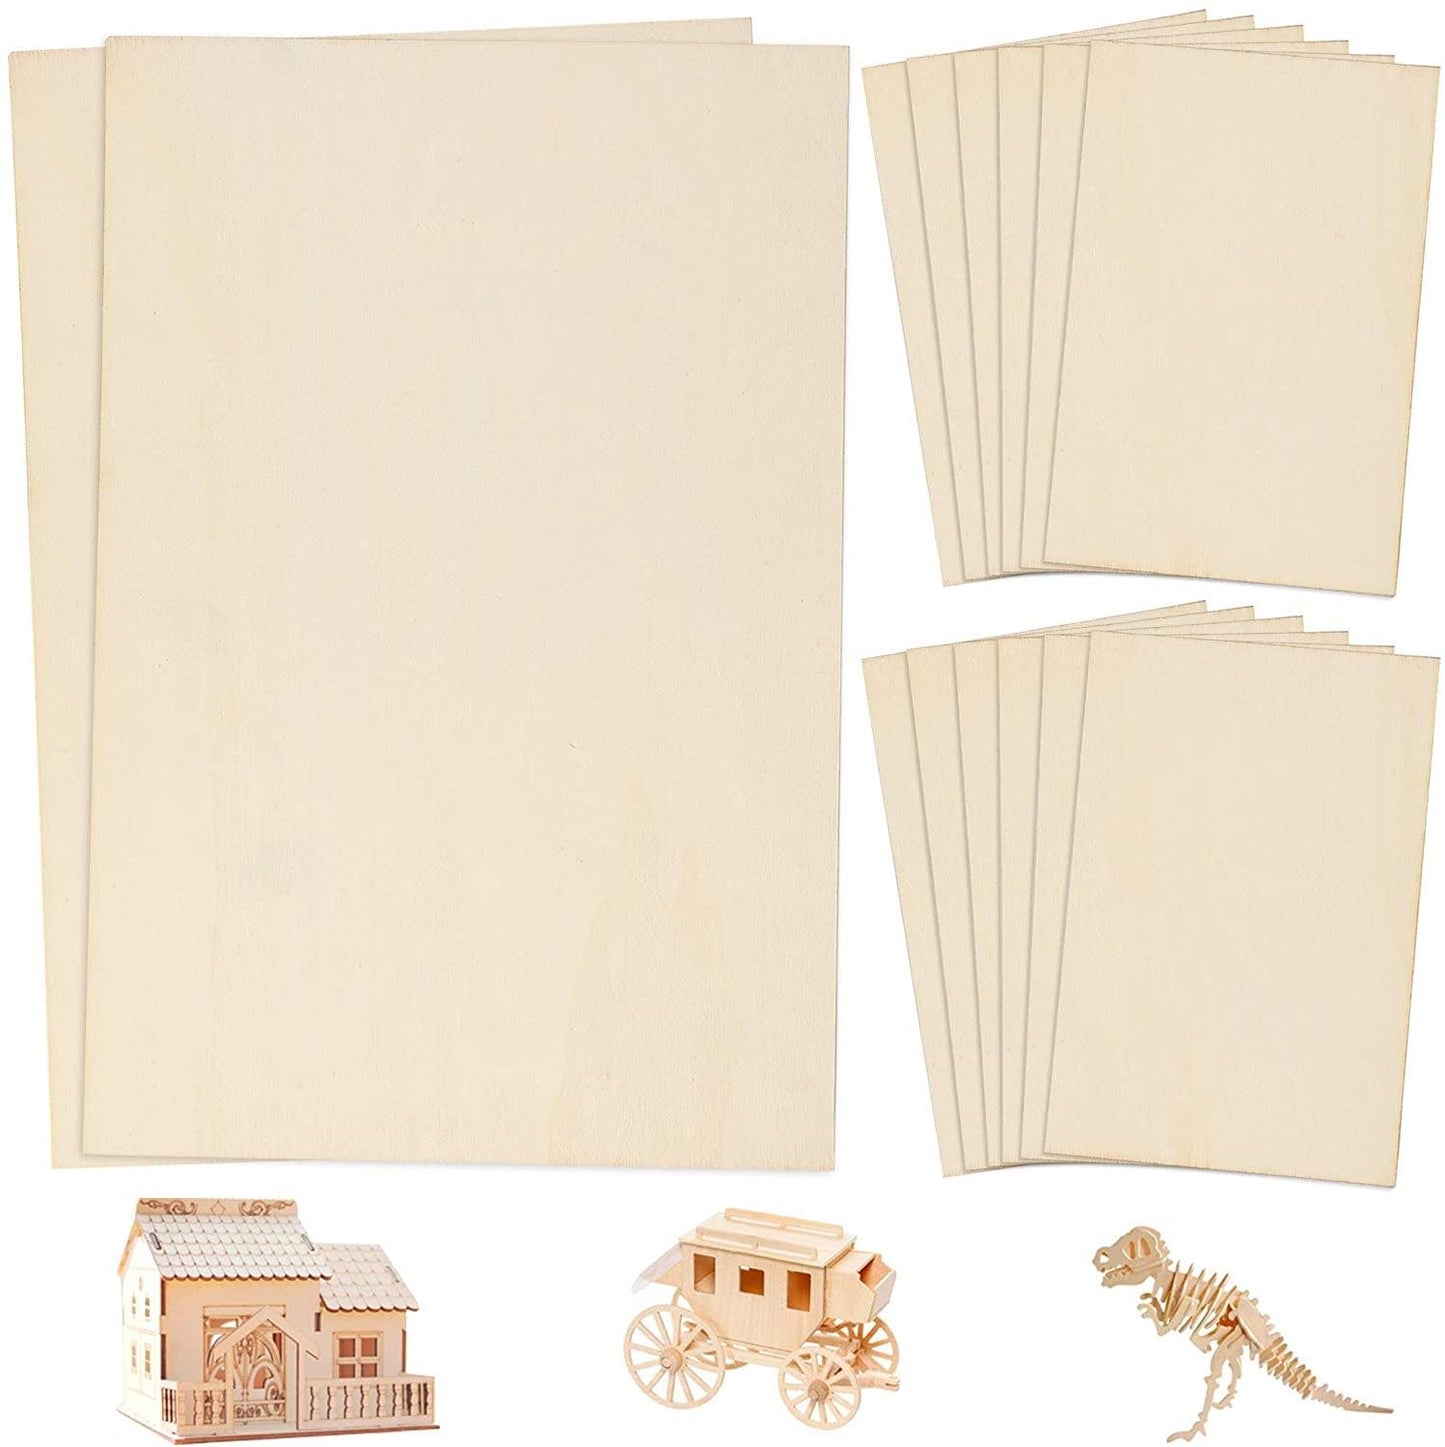 Plywood Sheets for Crafts 14Pc Blank Unfinished Basswood Thin Rectangle Wood Board Cutouts 2 Sizes 12Pc 6X4In 2Pc 12X8In - WoodArtSupply